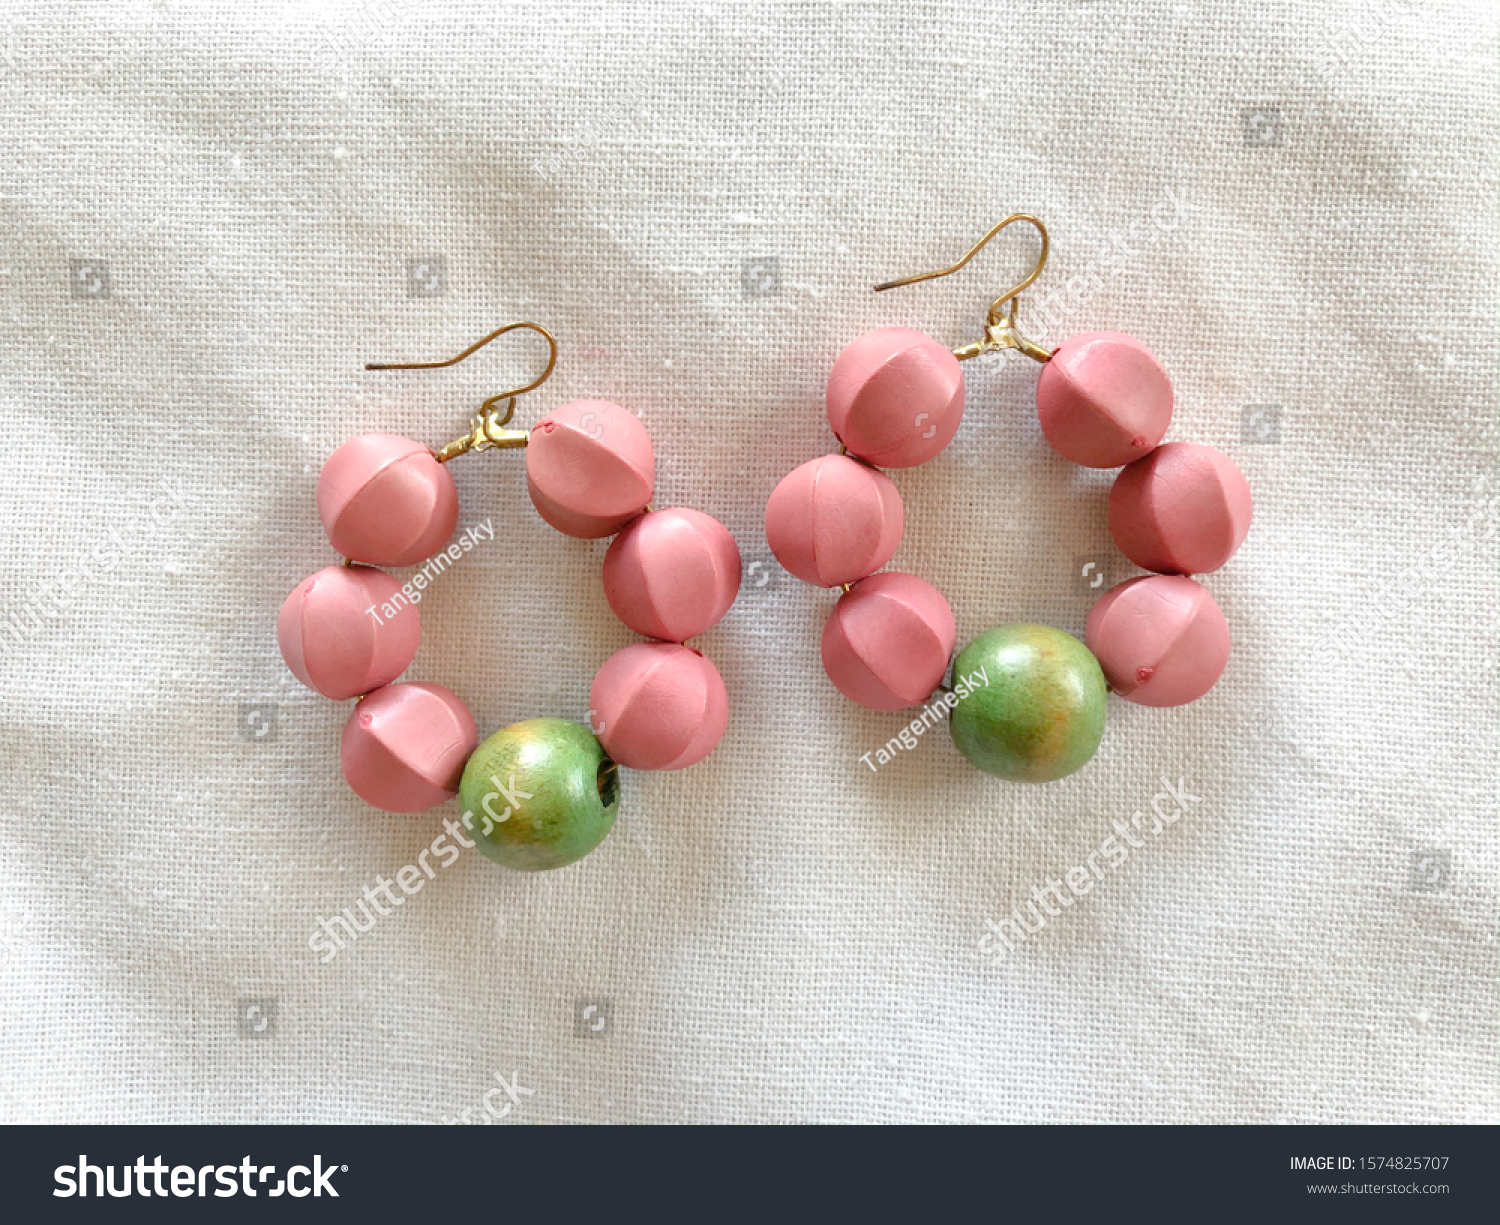 Wooden earrings DIY workshop handmade jewelry crafted work pastel green pink color clean hand craft by artisan #1574825707